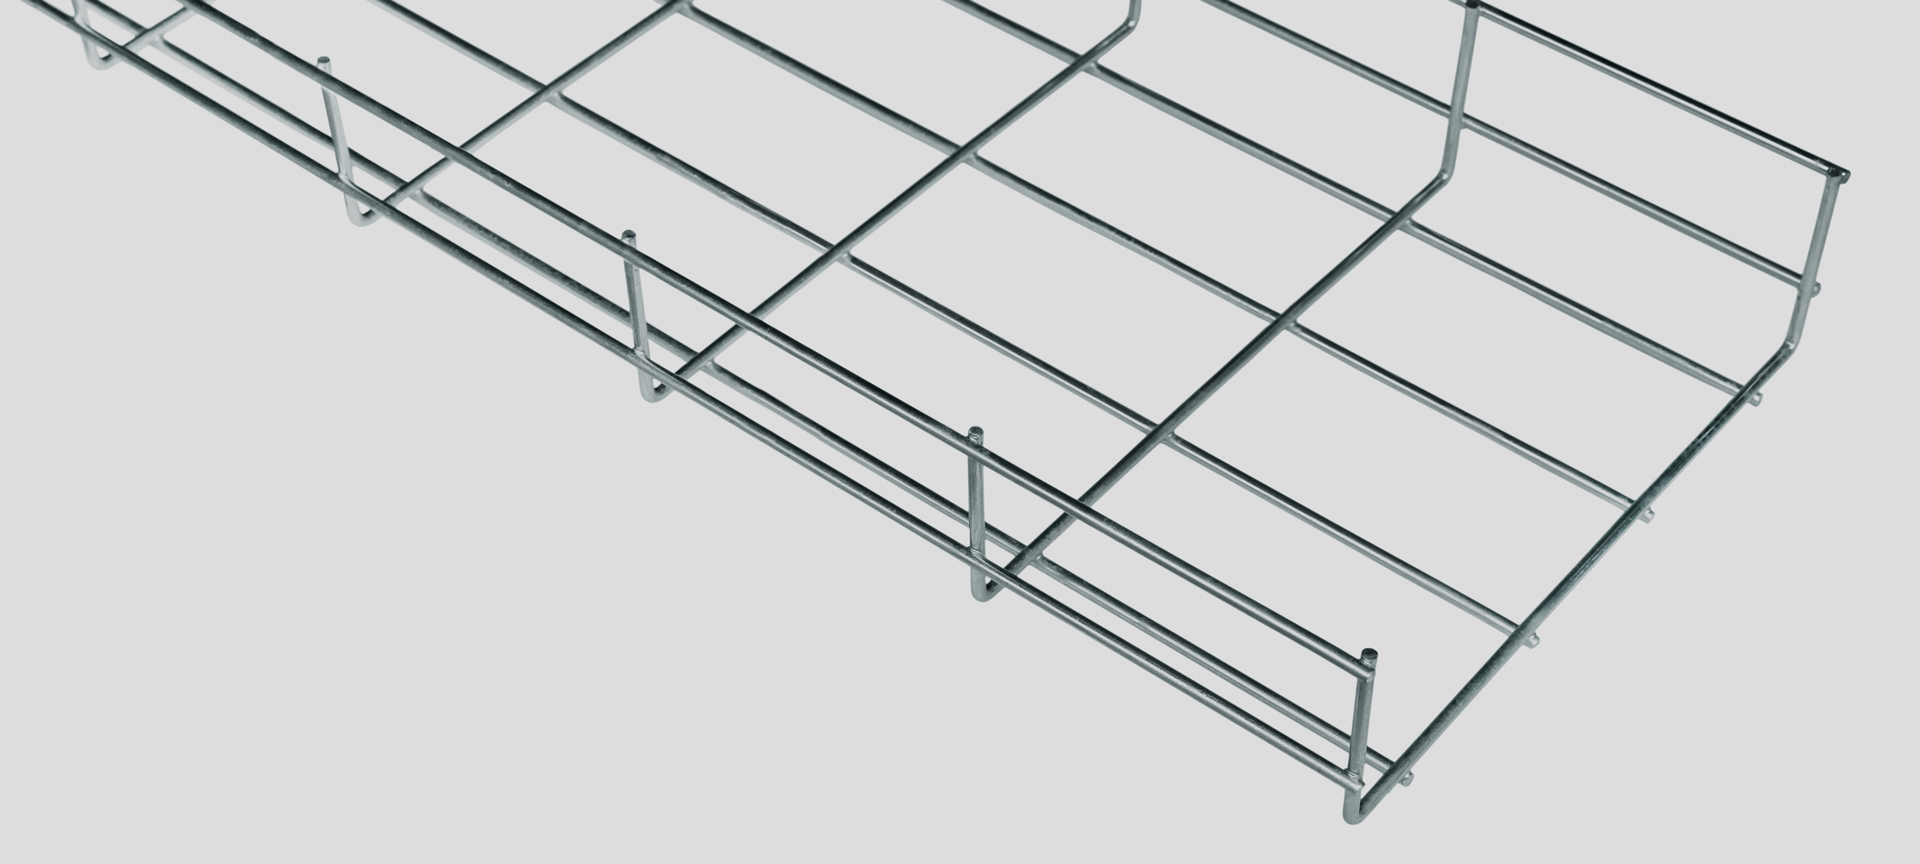 Metalicon steel wire cable basket trays installation